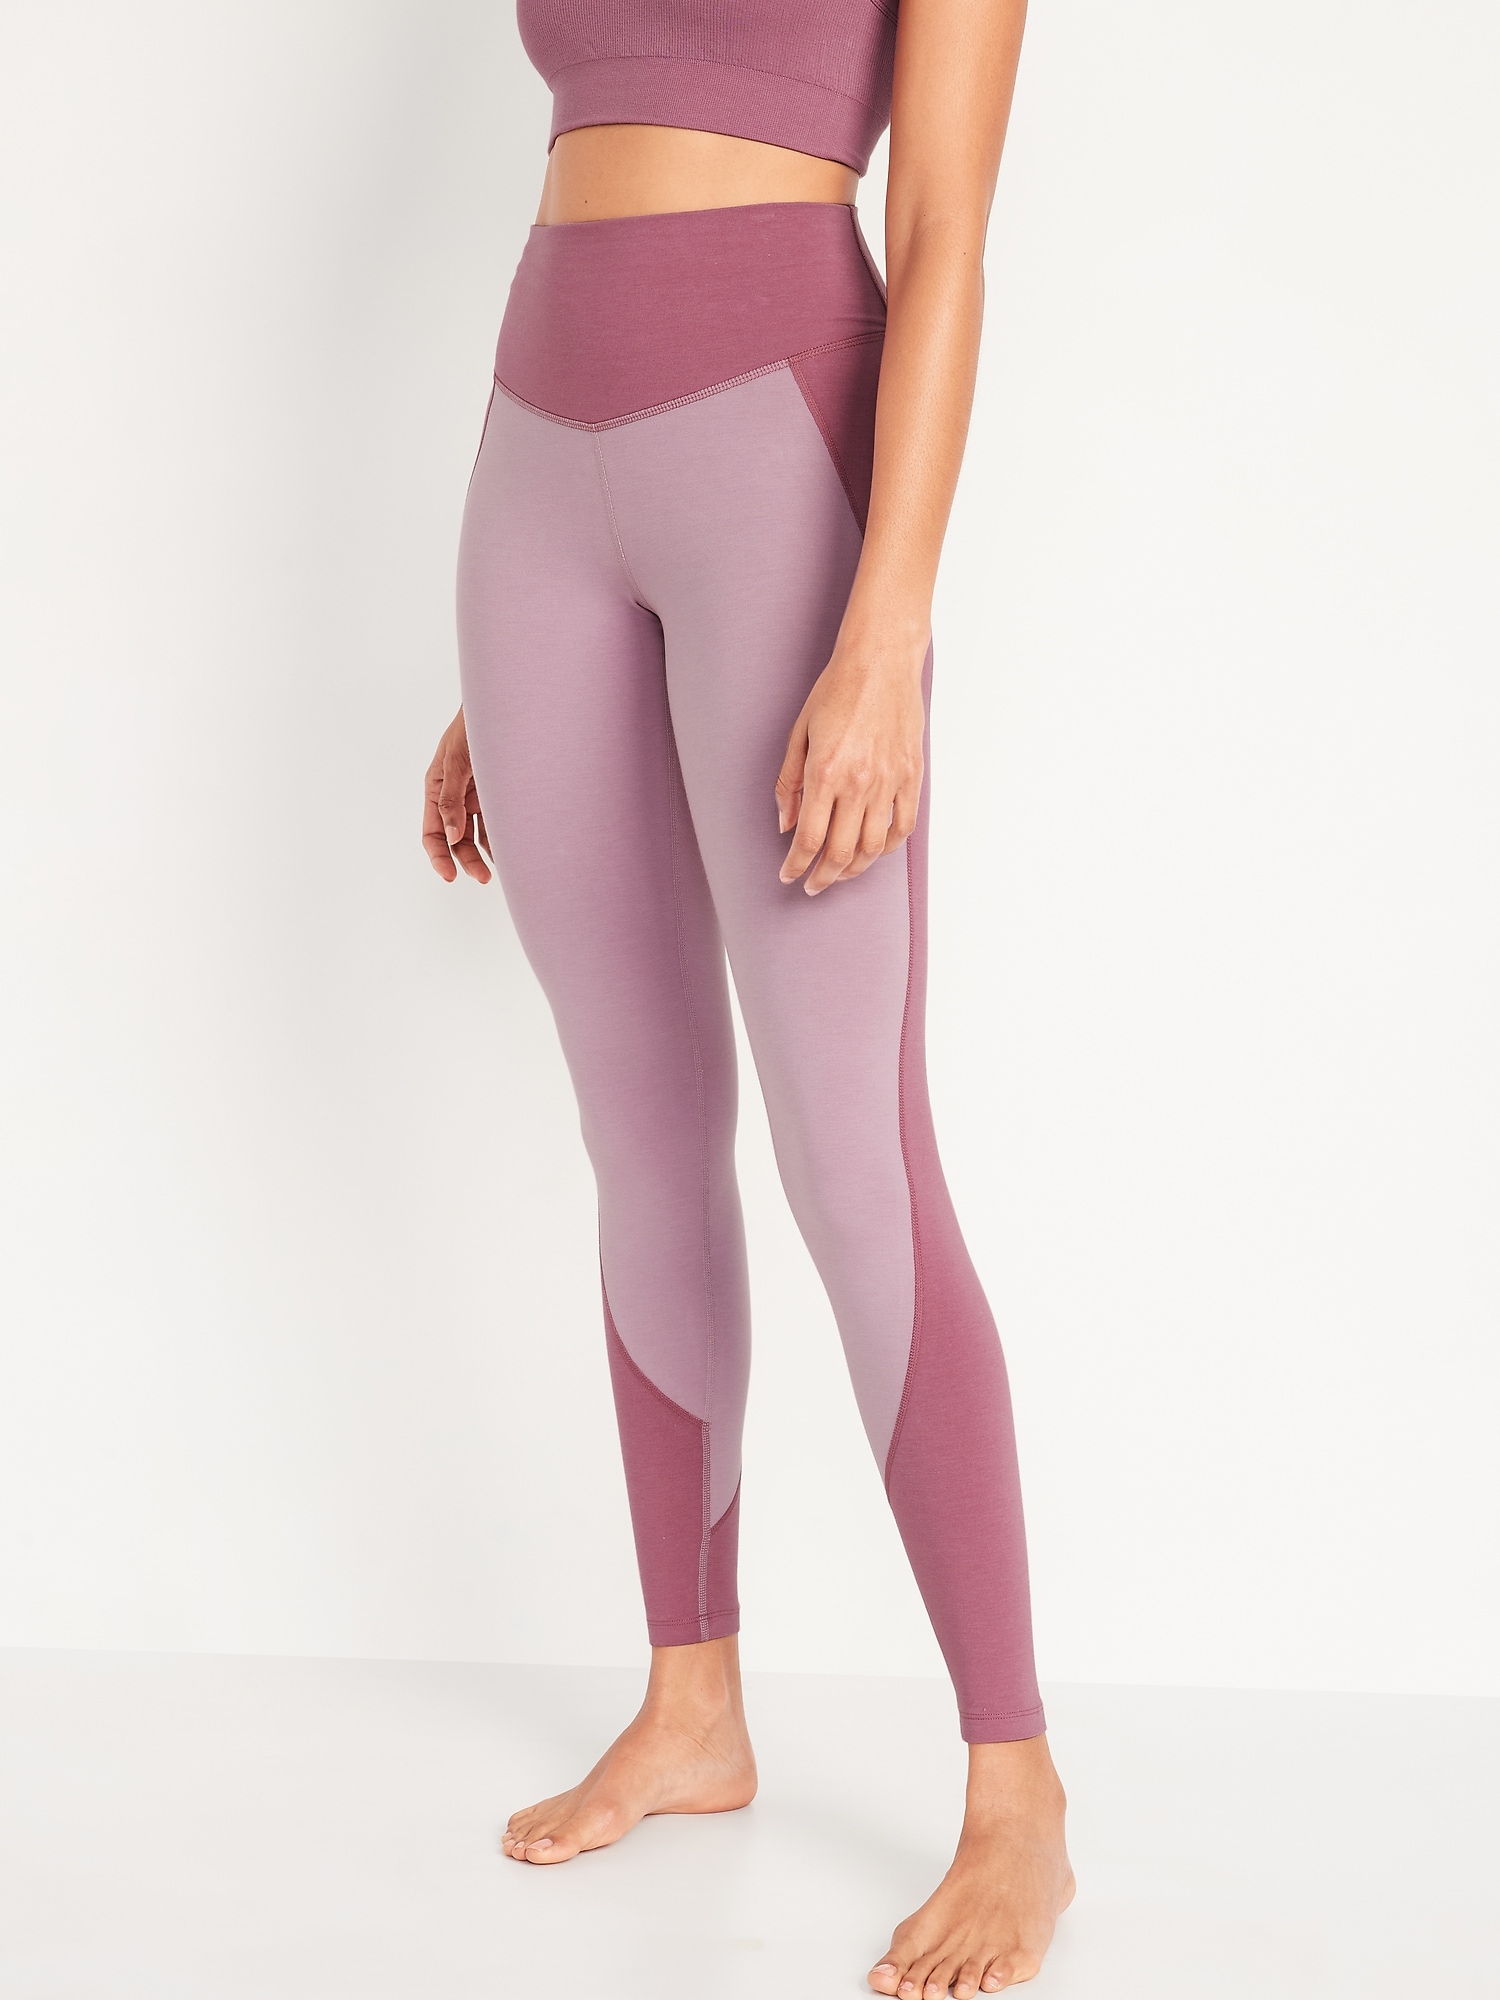 Extra High-Waisted PowerChill Two-Tone Compression Leggings for